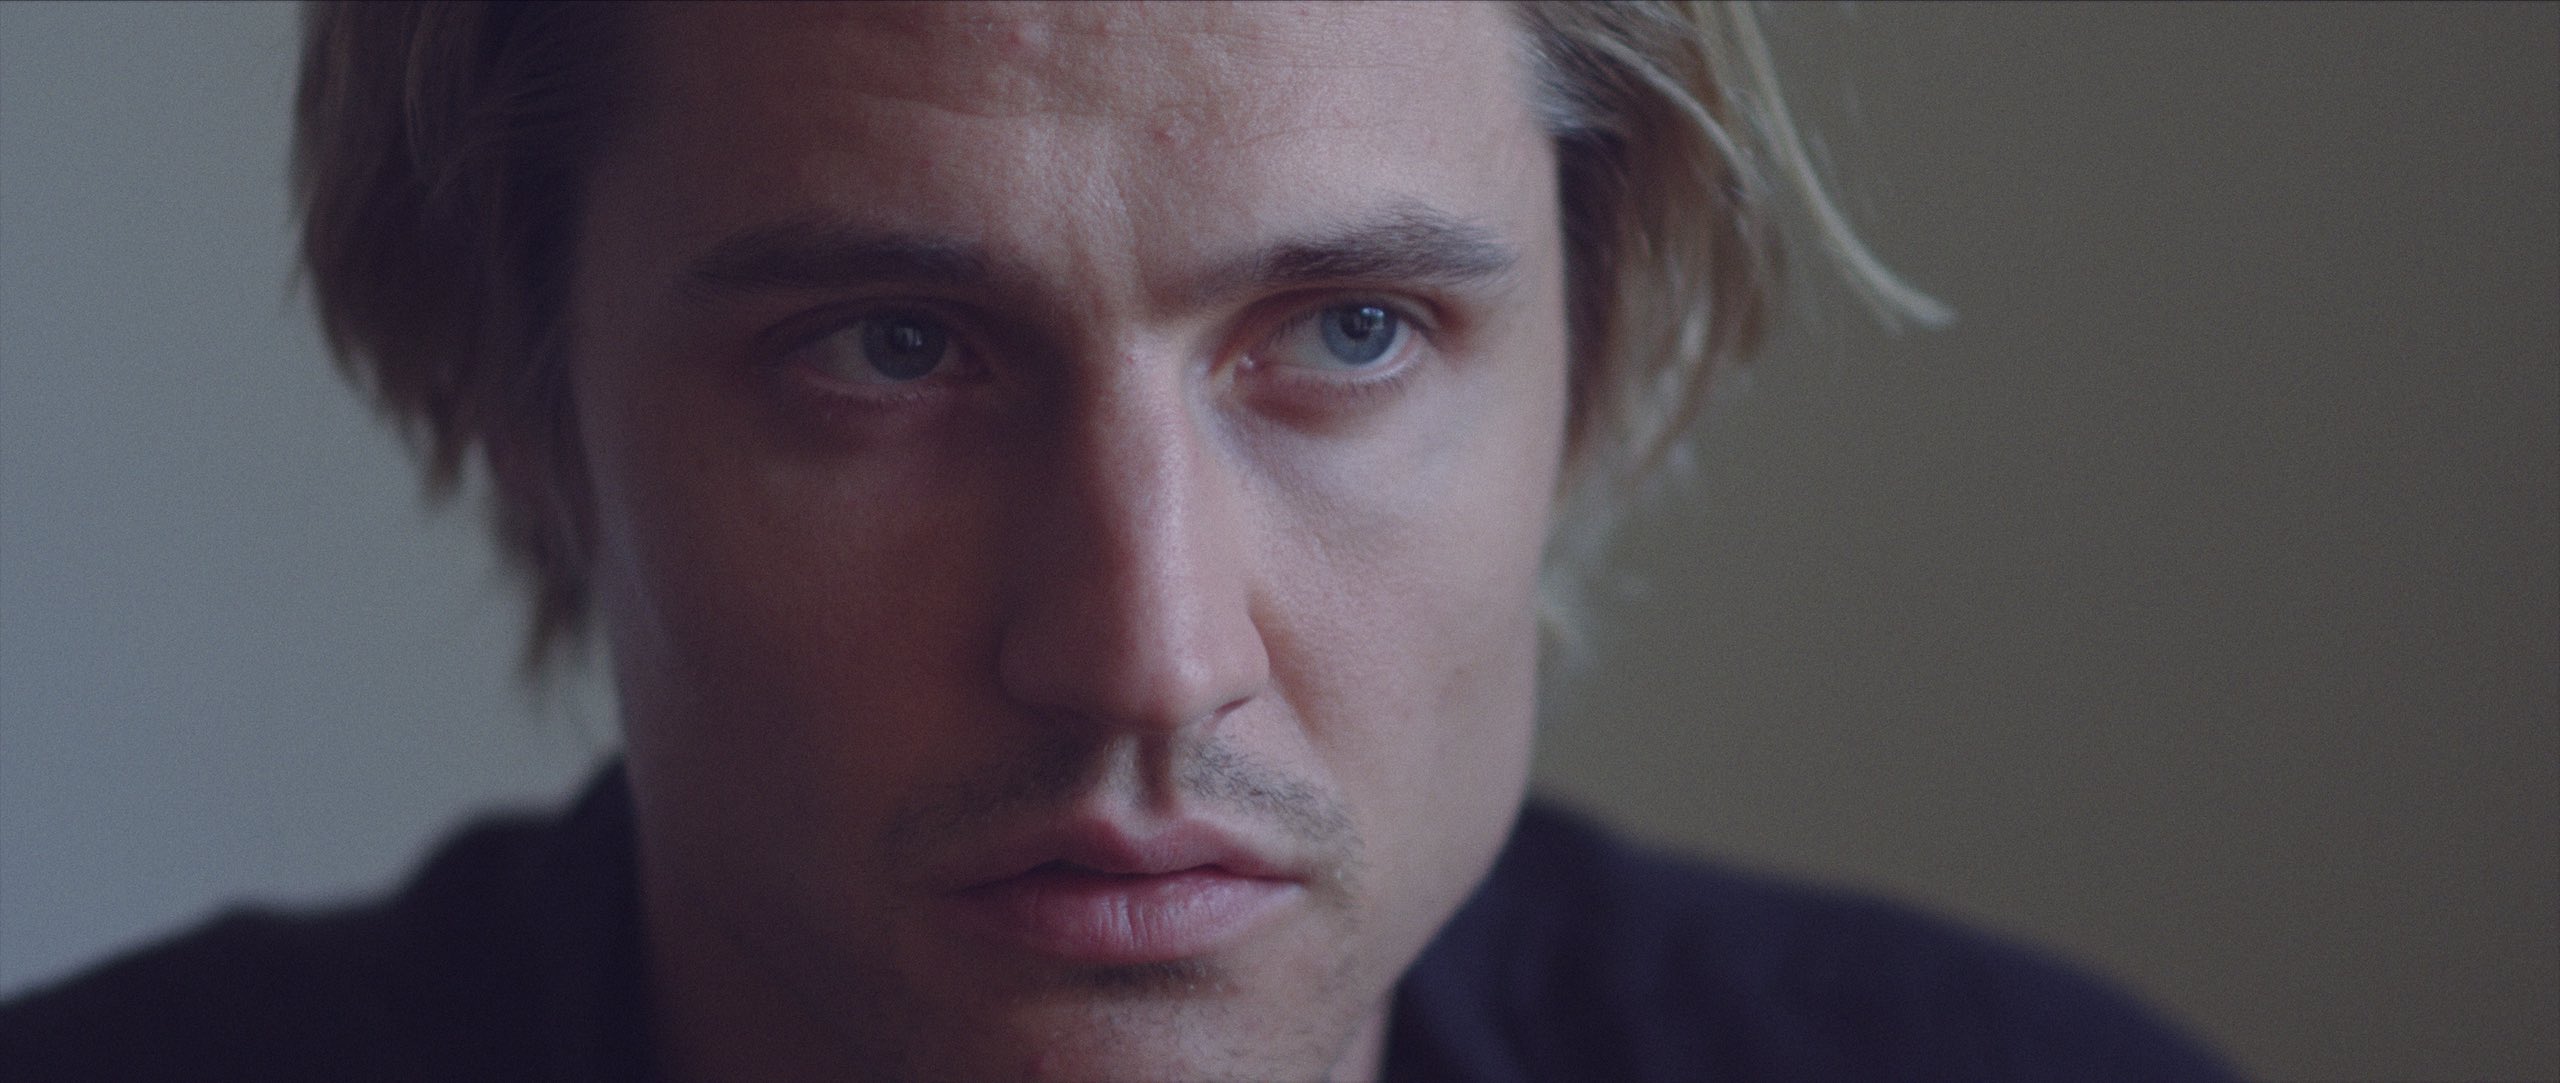 Jellyfish Short Film Produced by C&I Studios Closeup of man with short blond hair headshot